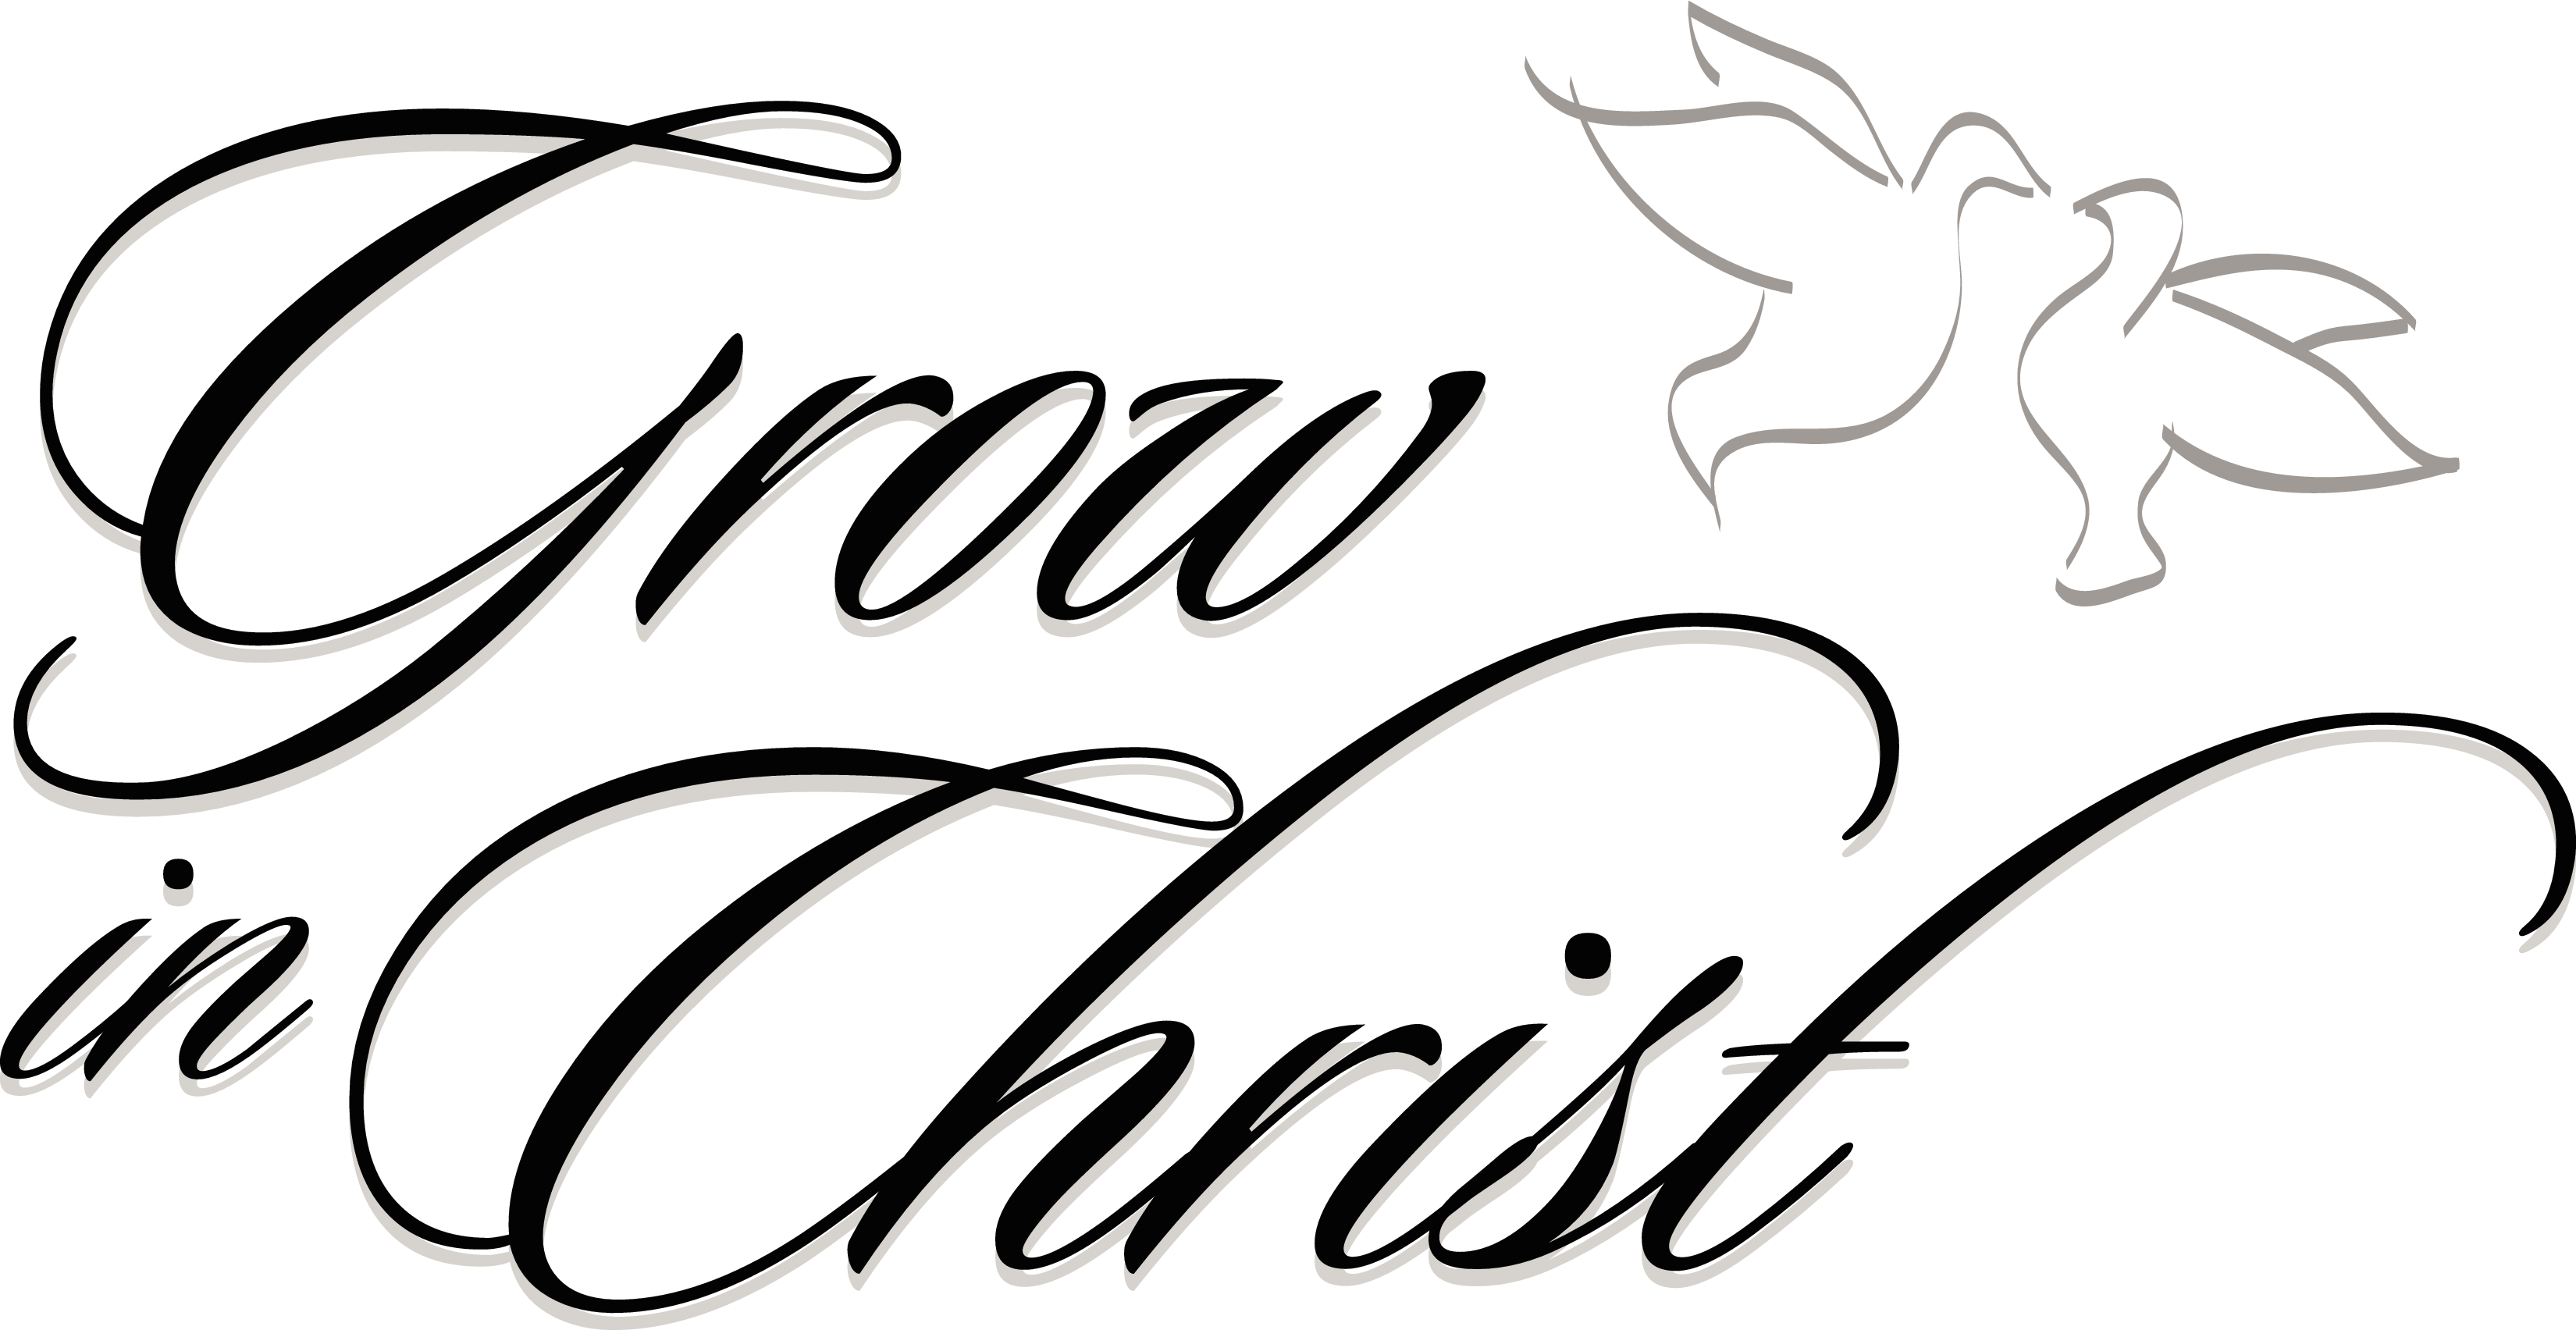 free black and white clipart of jesus - photo #50